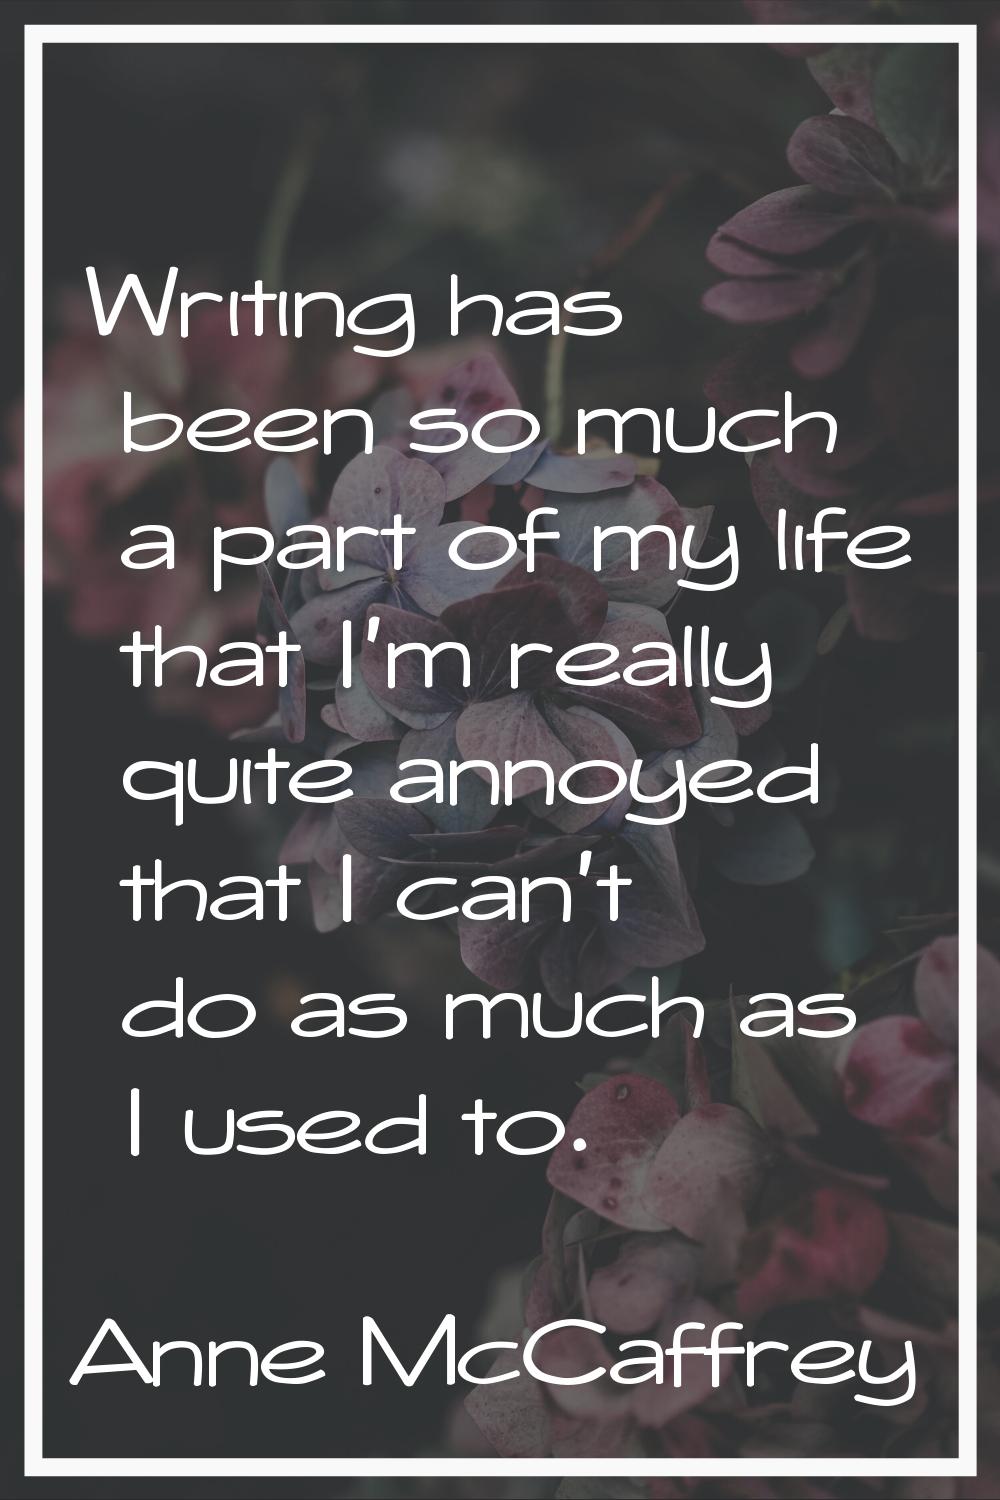 Writing has been so much a part of my life that I'm really quite annoyed that I can't do as much as